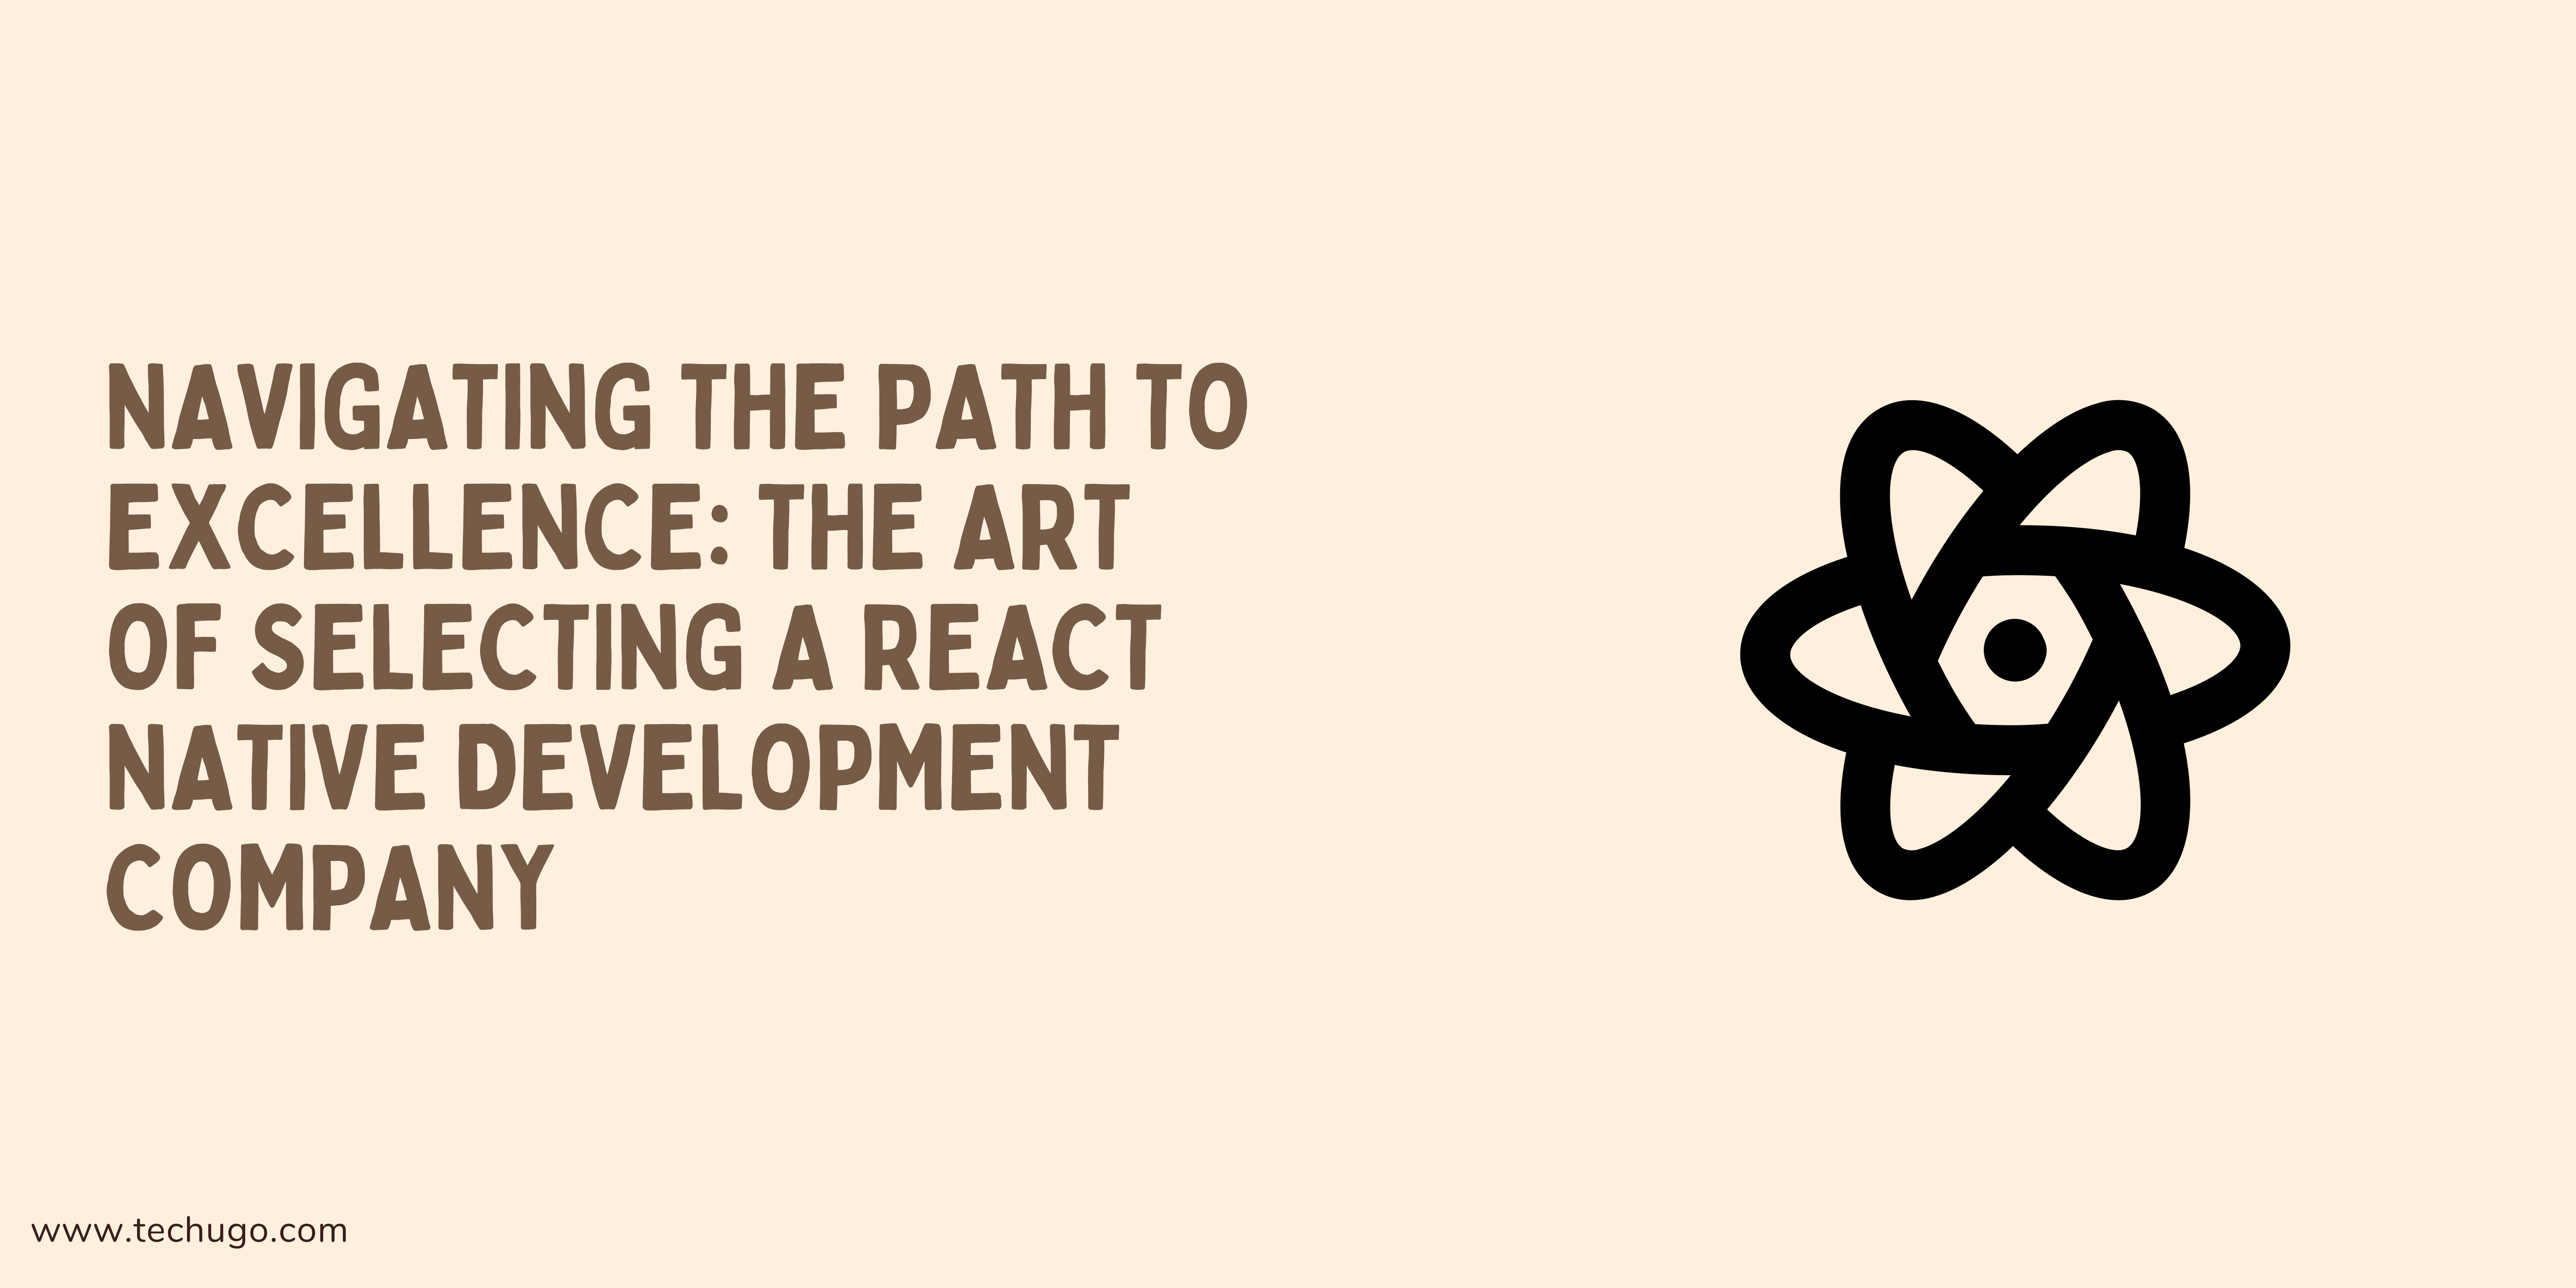 Navigating the Path to Excellence: The Art of Selecting a React Native Development Company